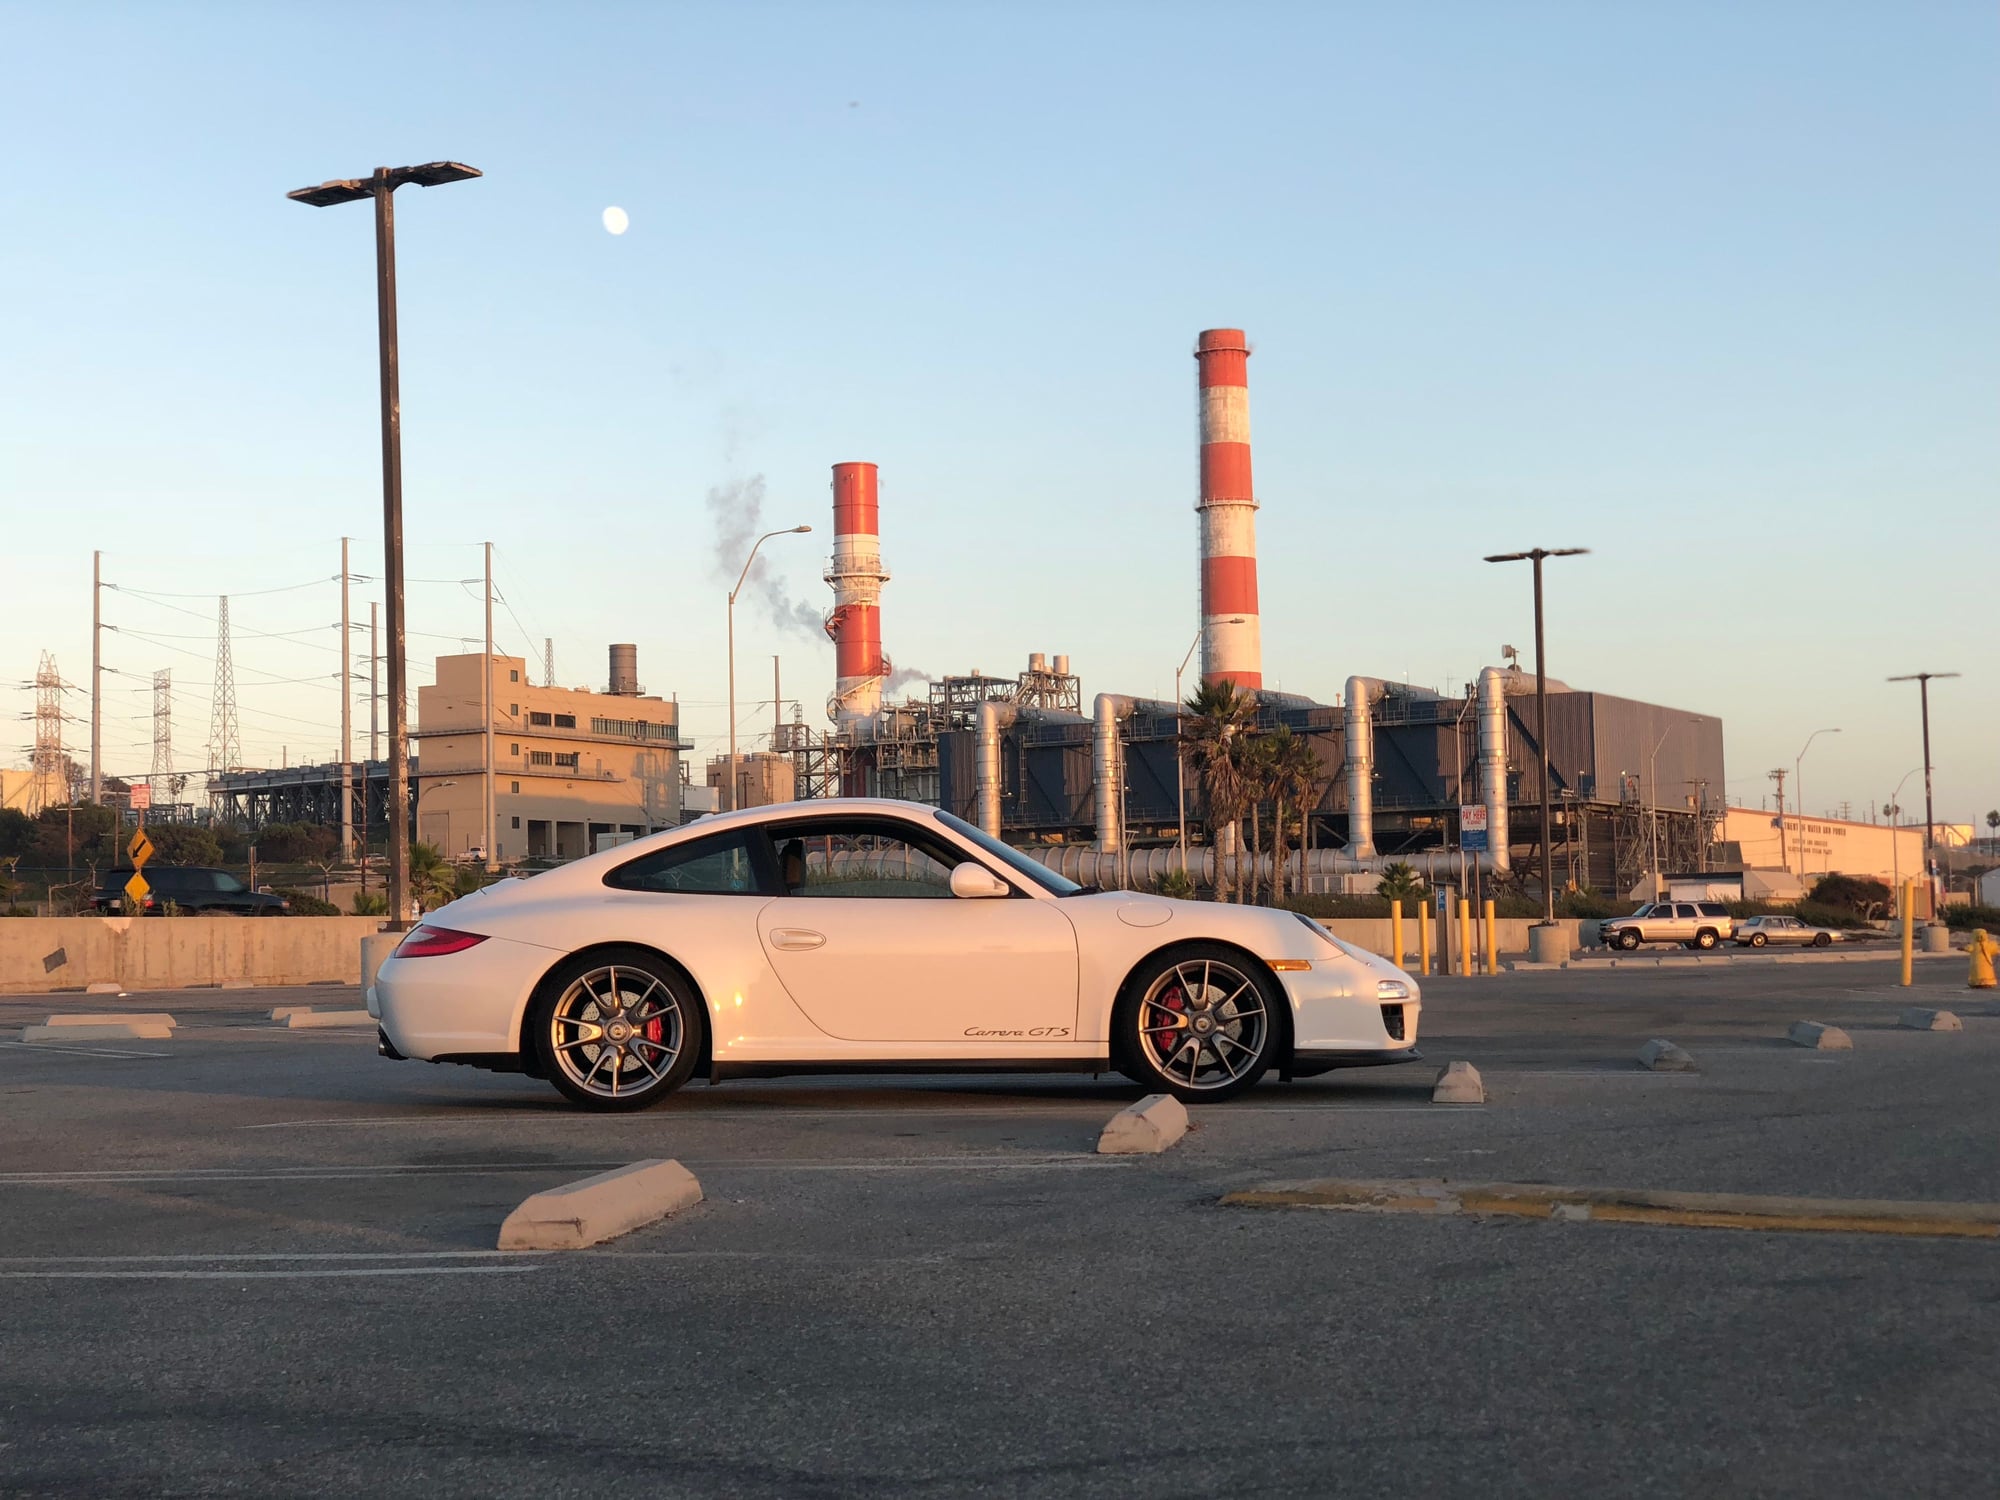 Wheels and Tires/Axles - 997.2 CL GT3 wheel set w/ Continental Tires $2,800 - Used - 2010 to 2012 Porsche GT3 - Playa Del Rey, CA 90293, United States